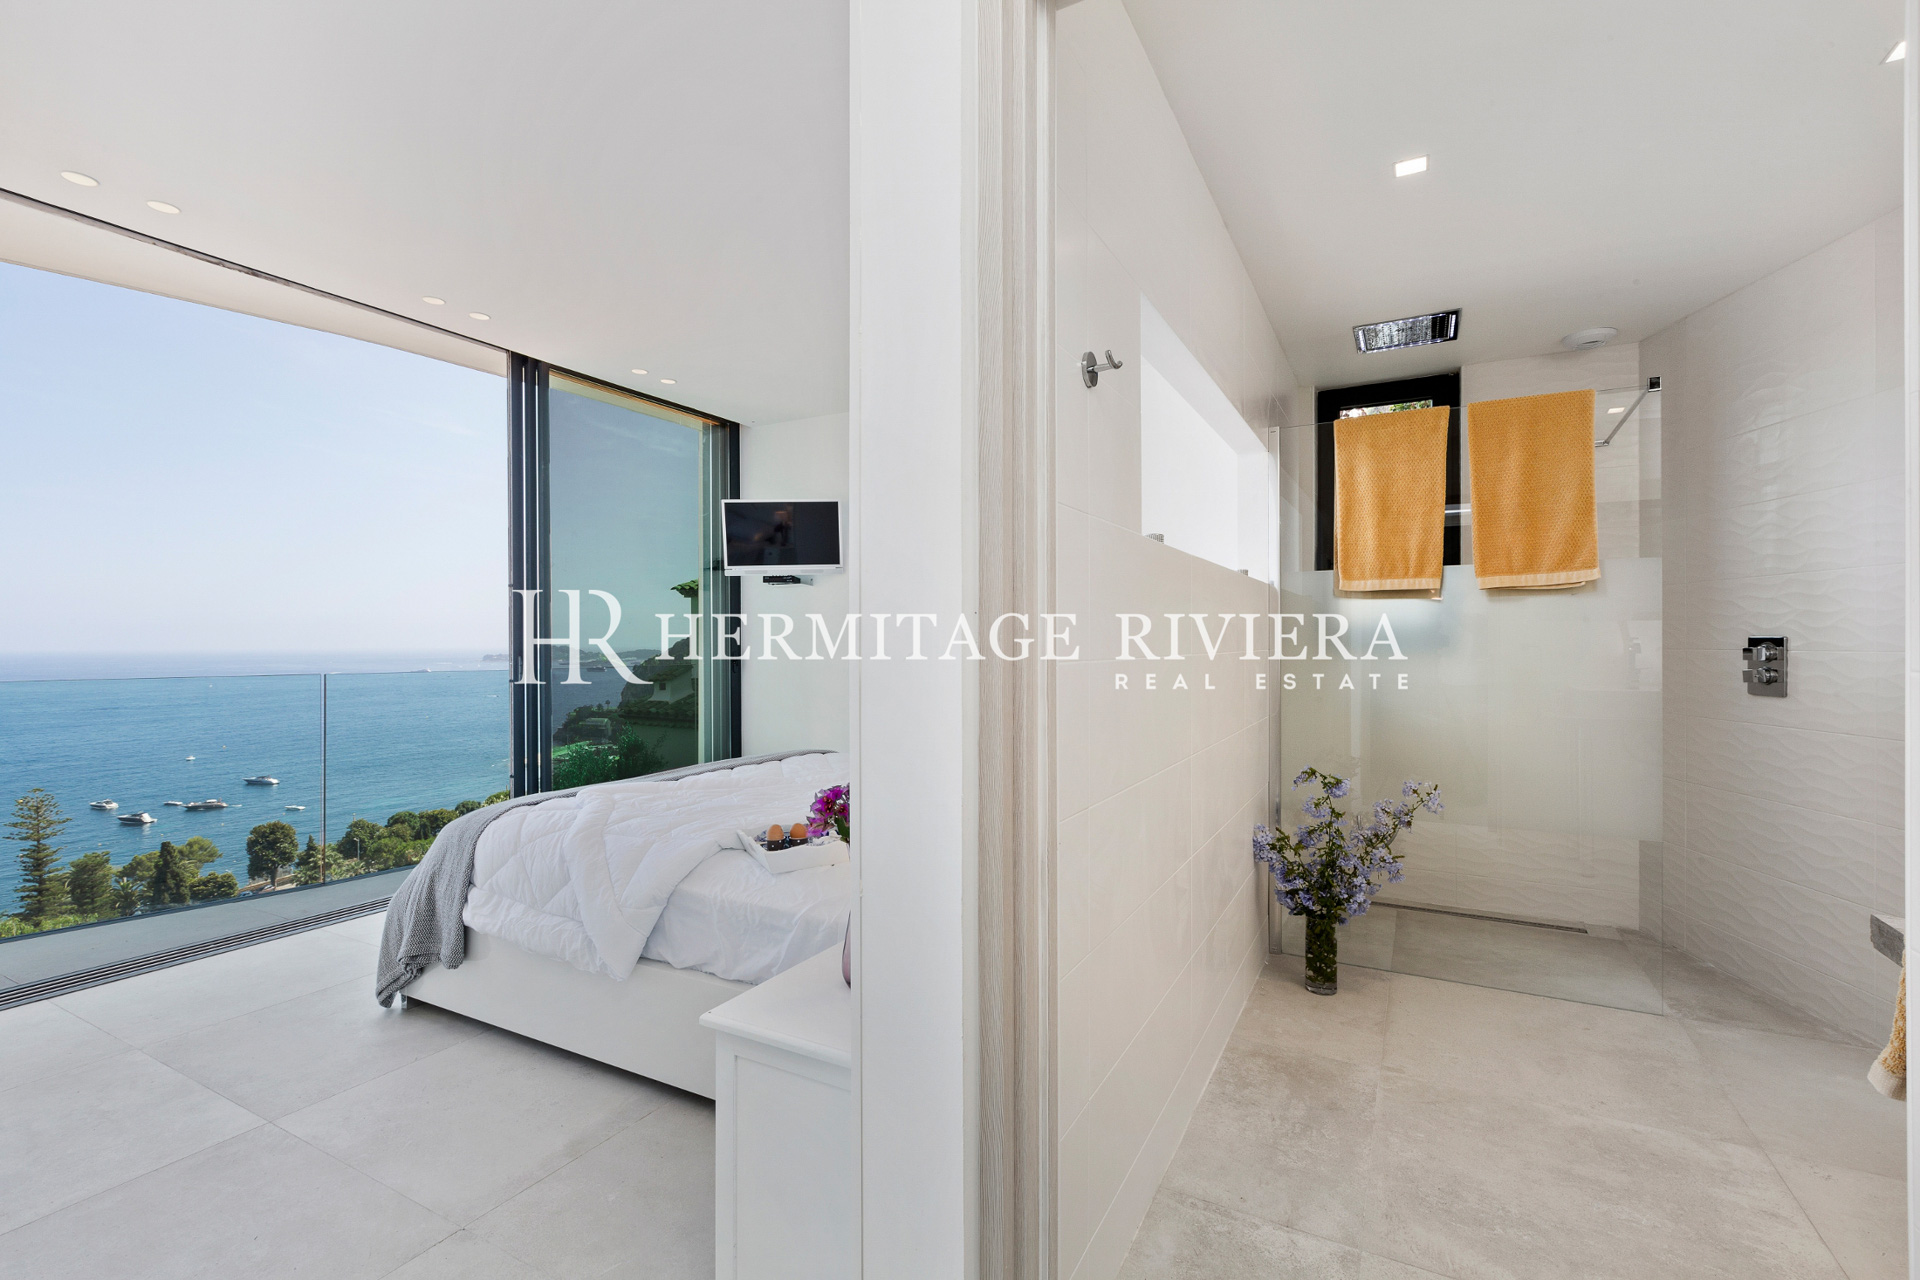 Contemporary villa in walking distance to beach (image 11)